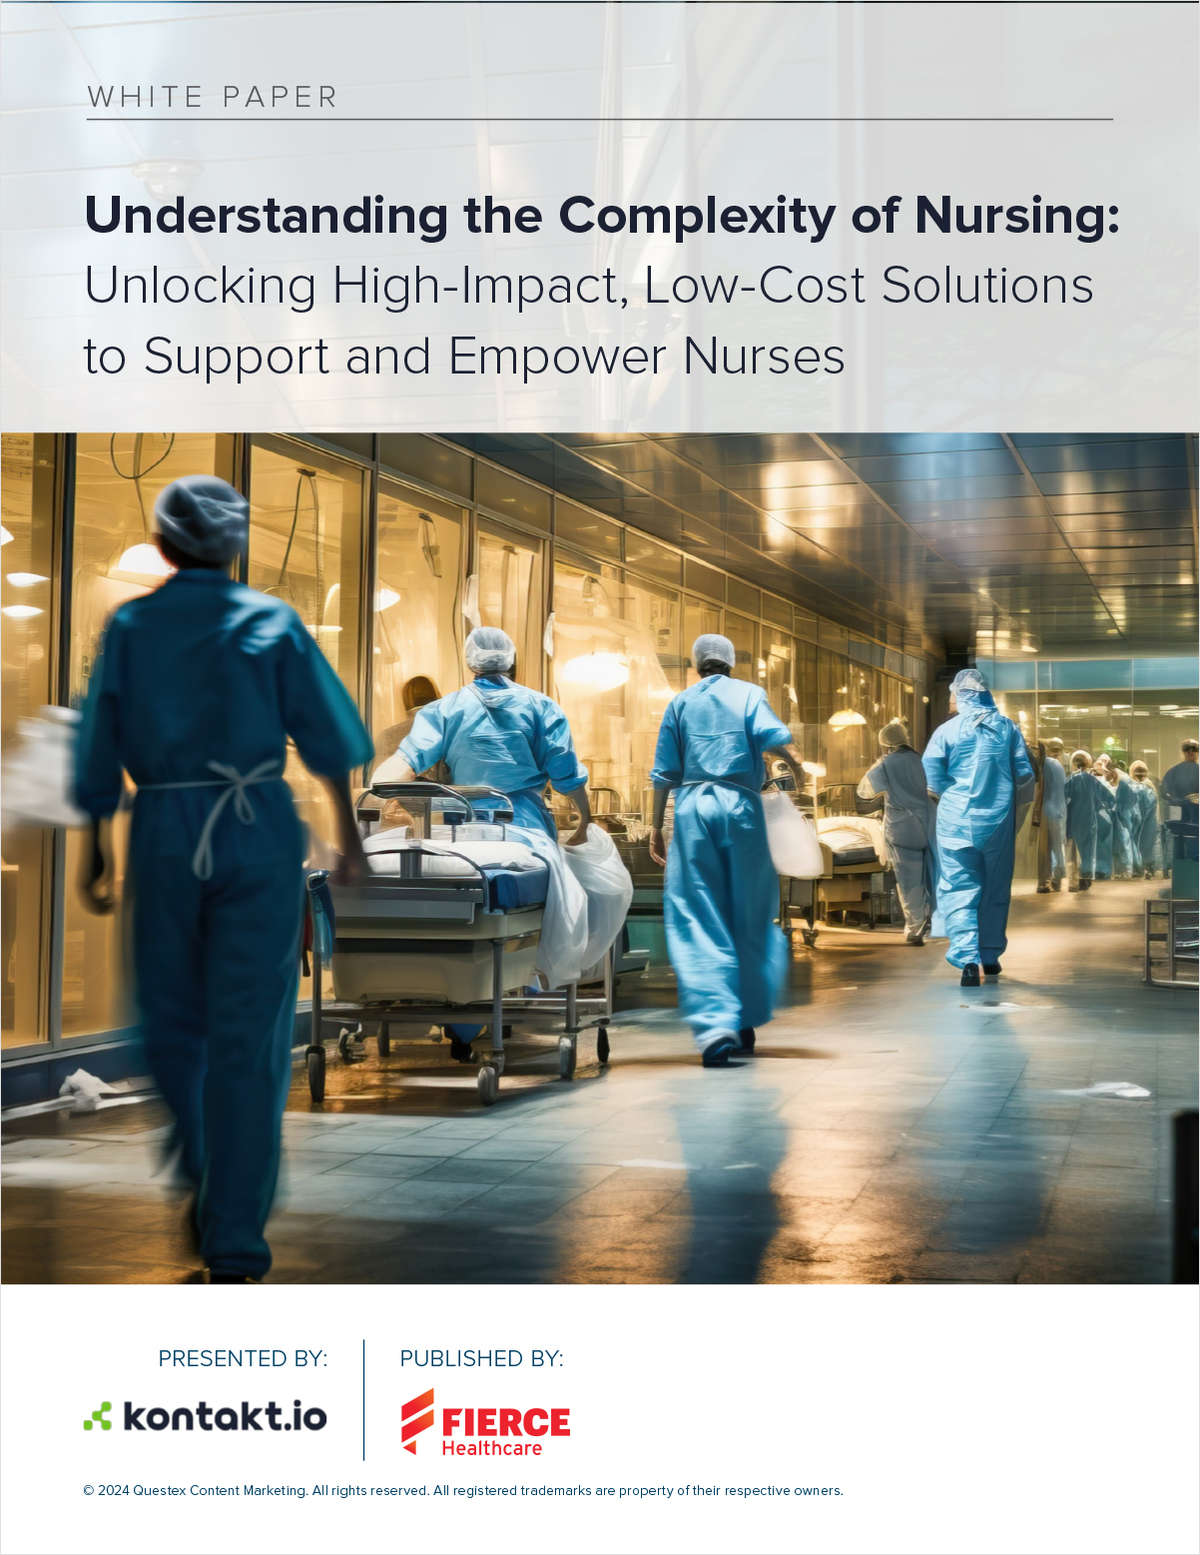 Understanding the Complexity of Nursing: Unlocking High-Impact, Low-Cost Solutions to Support and Empower Nurses